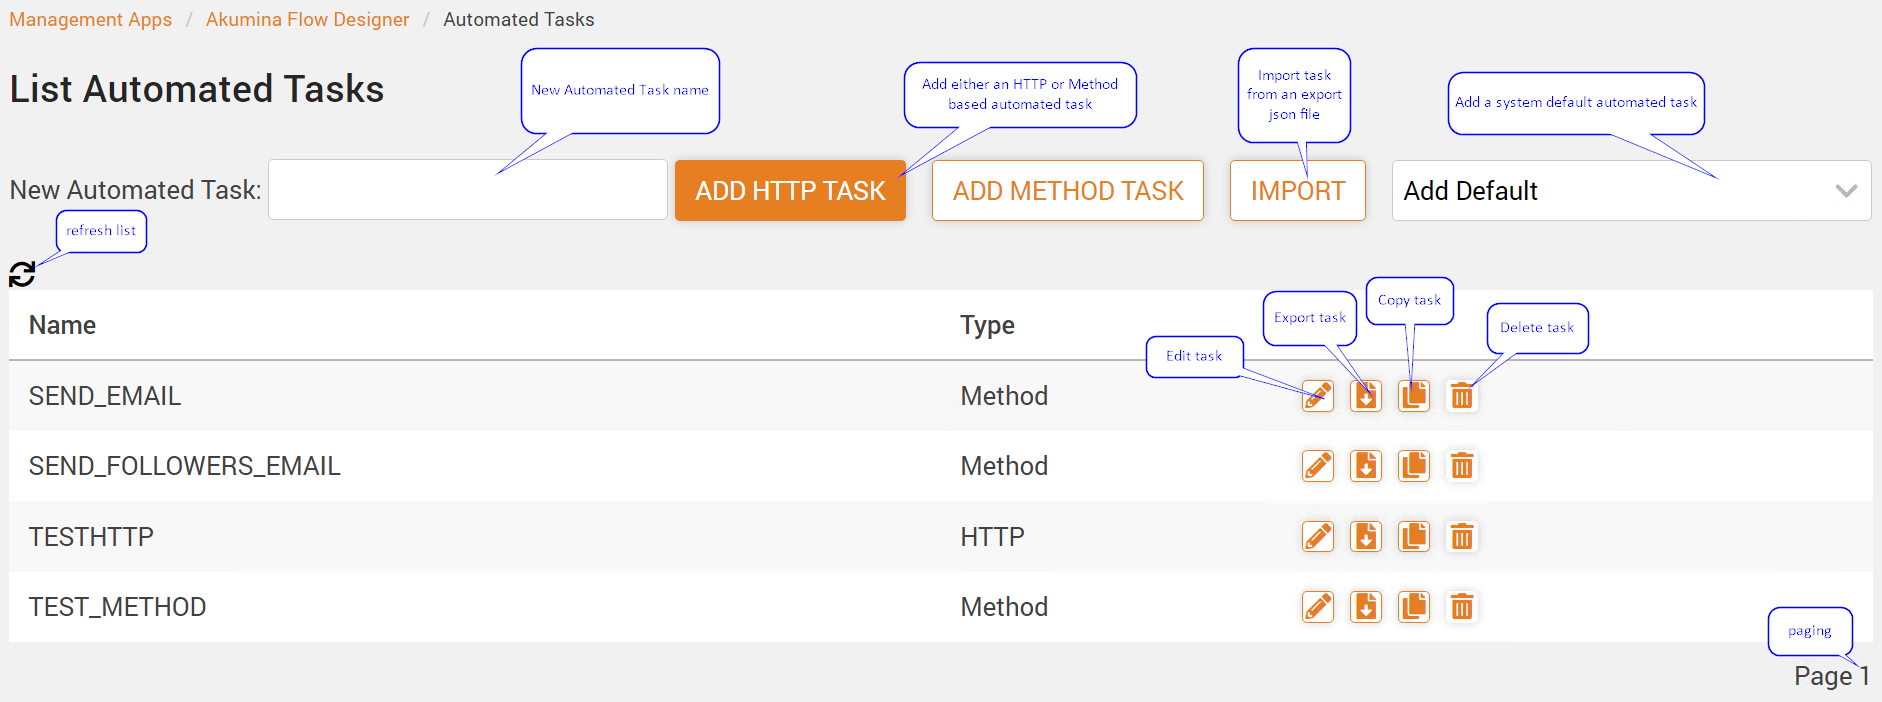 Automated Tasks Page